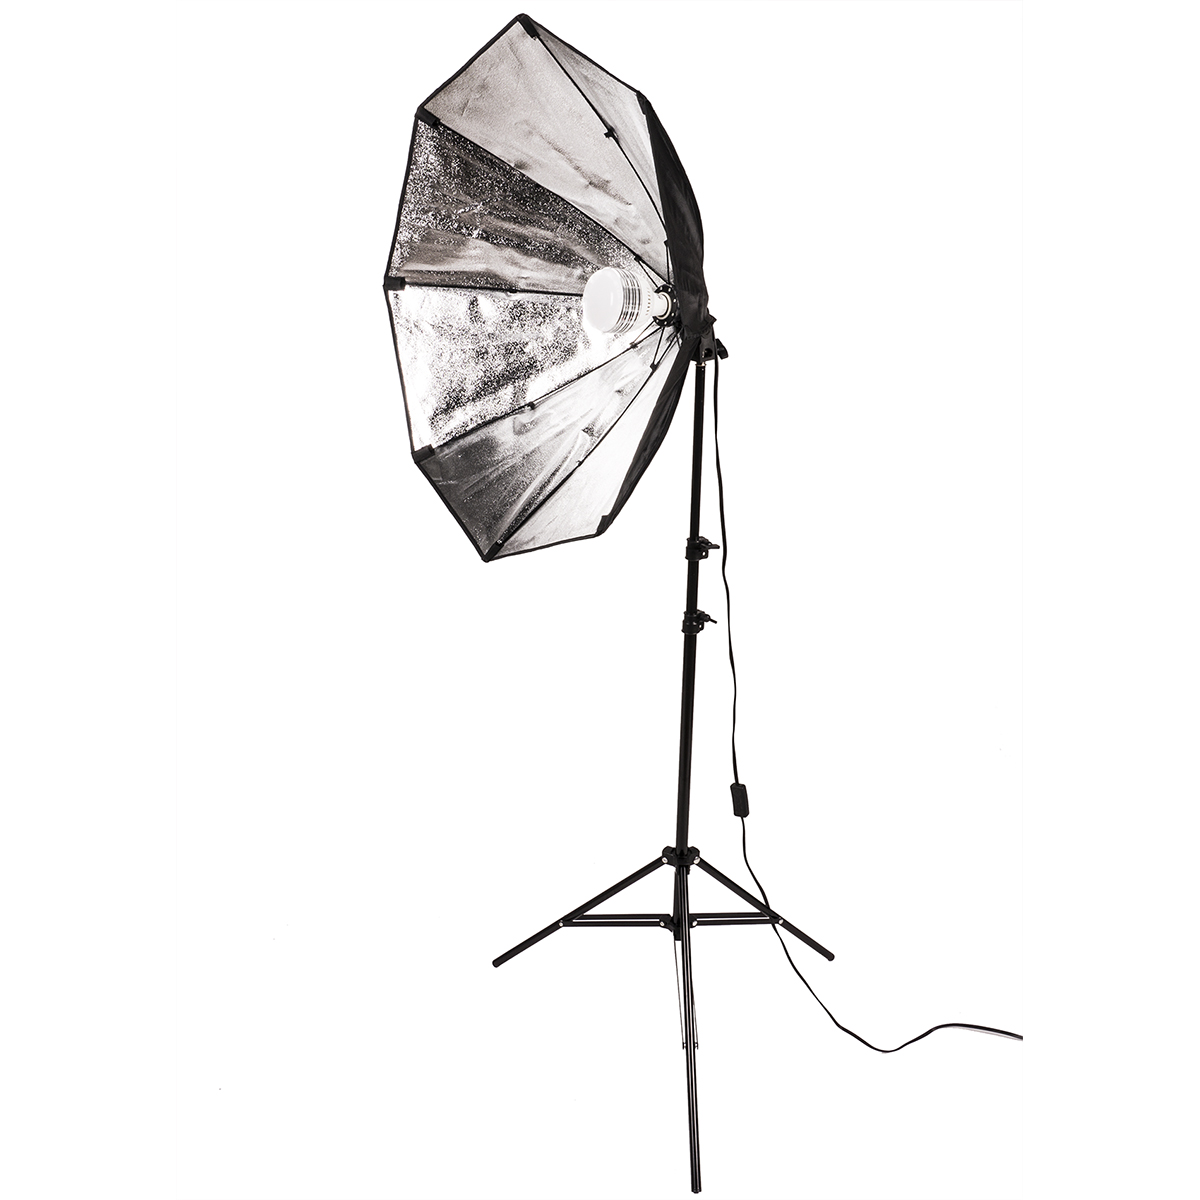 OctaBella 1500 – 3 light 1500W LED Daylight Softbox Lighting with Boom Arm – Smith-Victor